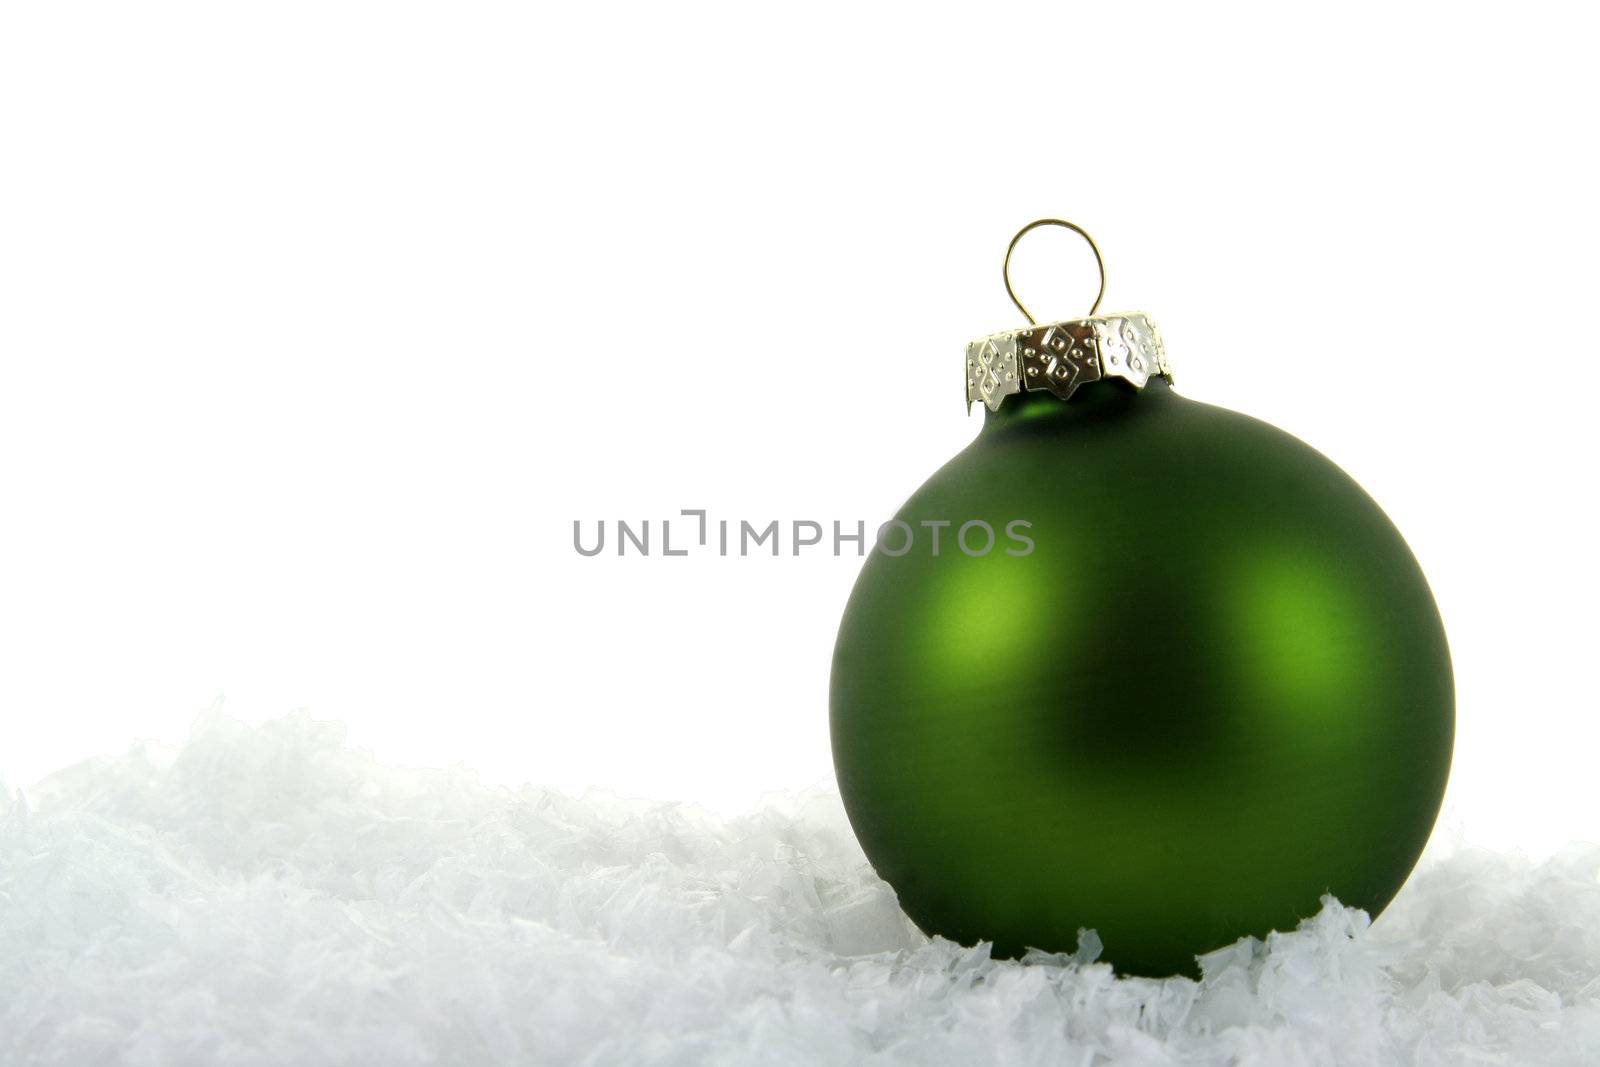 Dark Green Xmas Bauble in the Snow
 by ca2hill